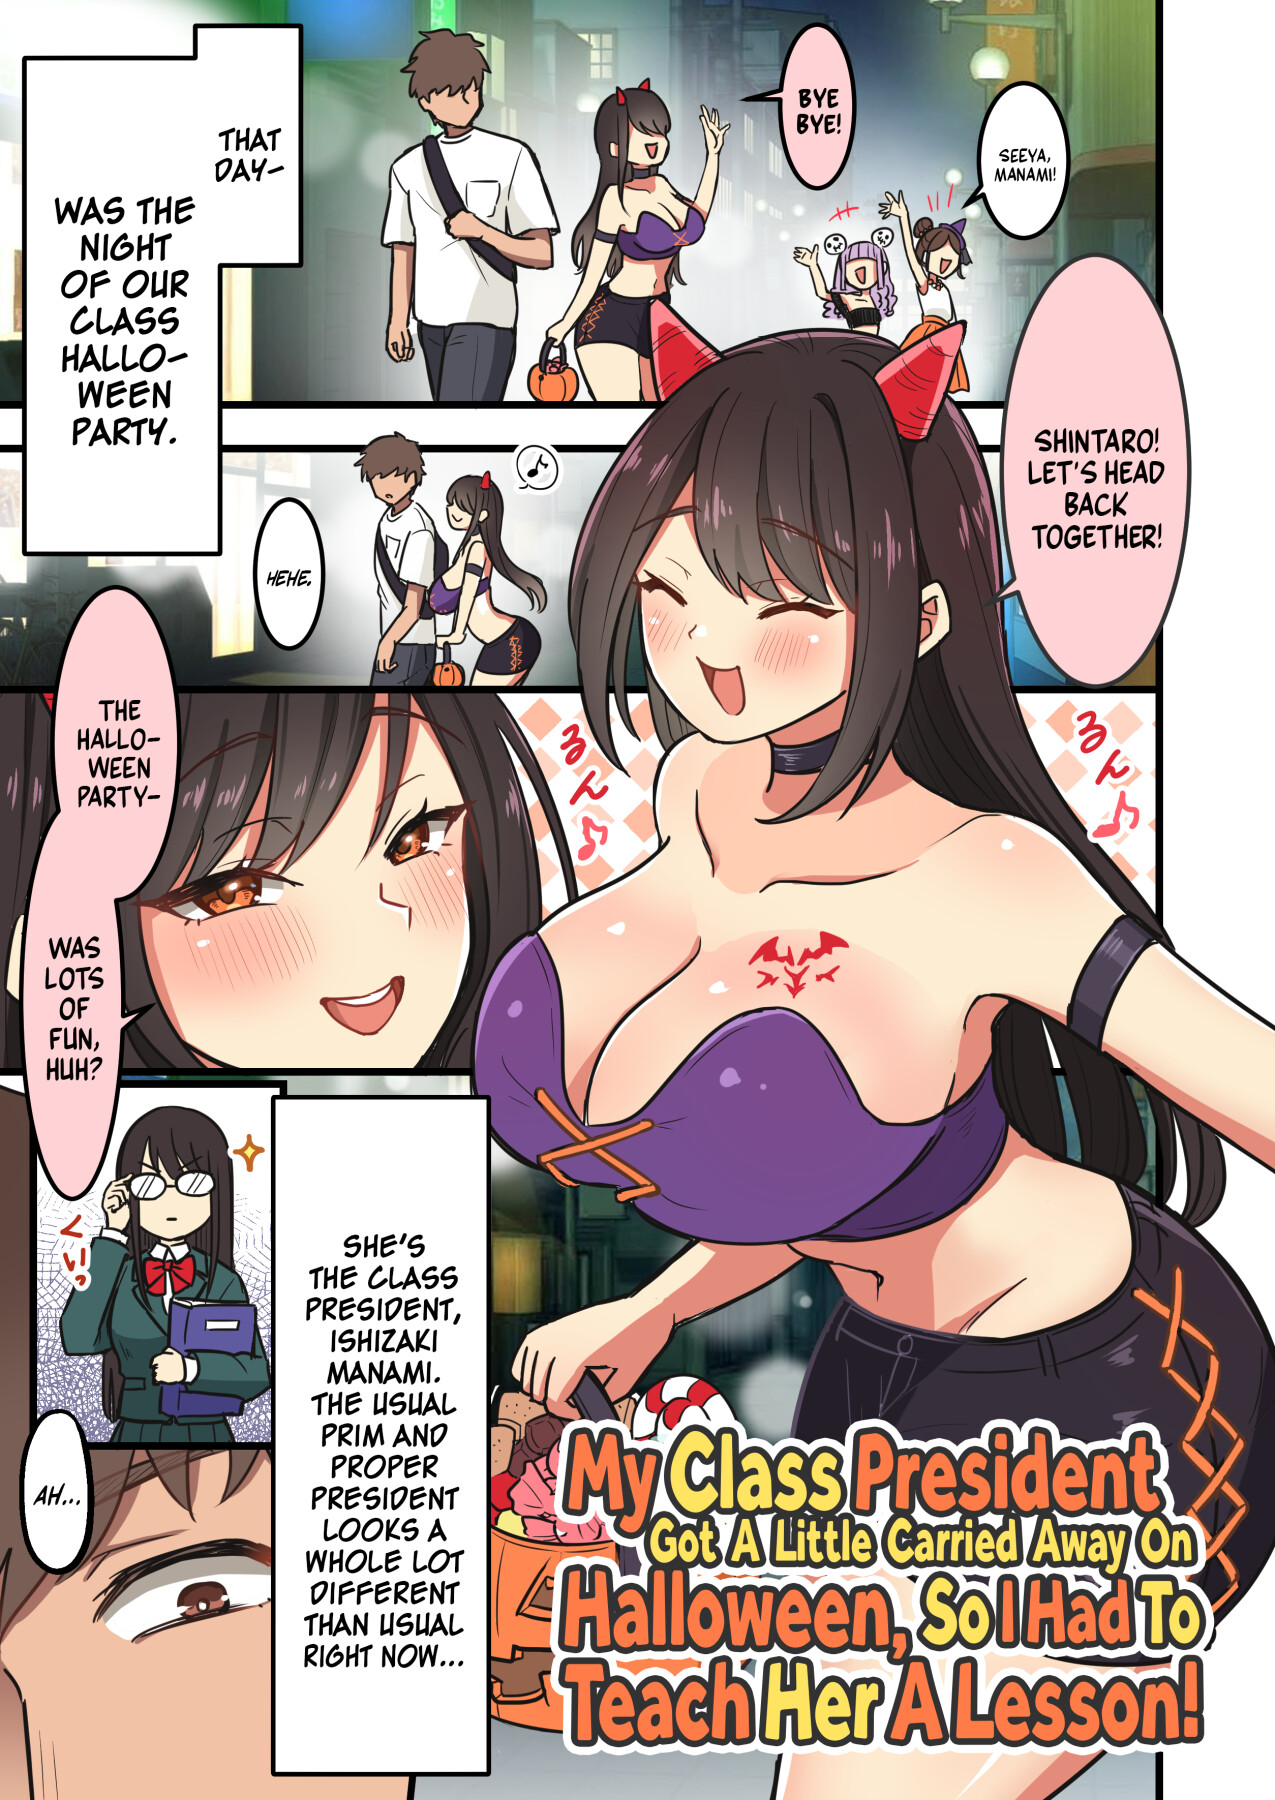 Hentai Manga Comic-My Class President Got a Little Carried Away On Halloween, So I Had toTeach her a Lesson!-Read-1